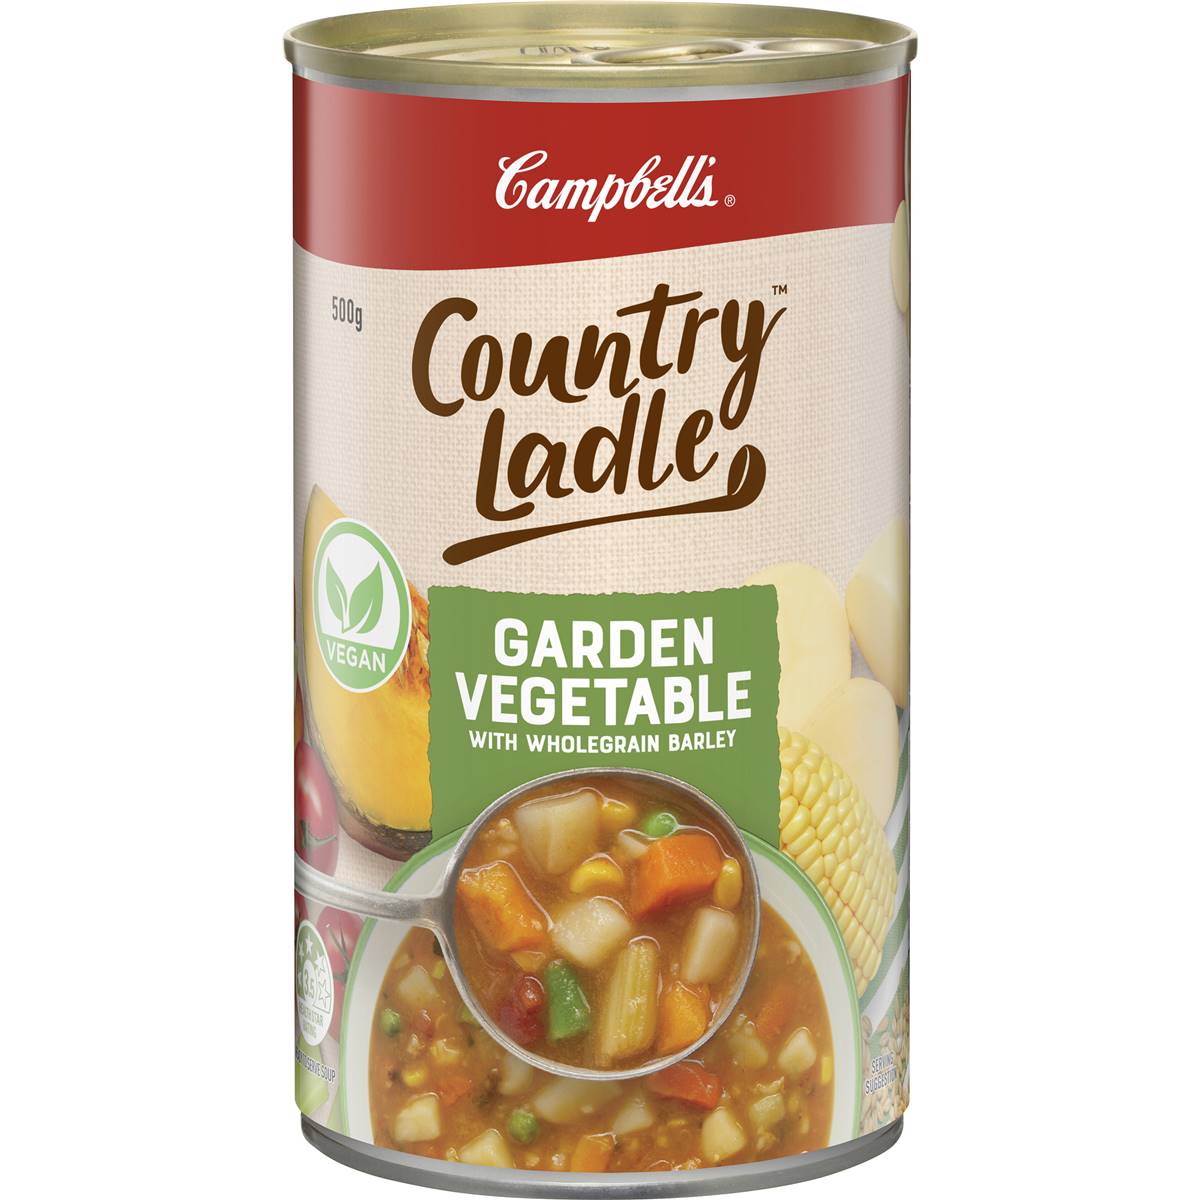 Campbell's Country Ladle Soup Garden Vegetable & Wholegrain Barley 500g